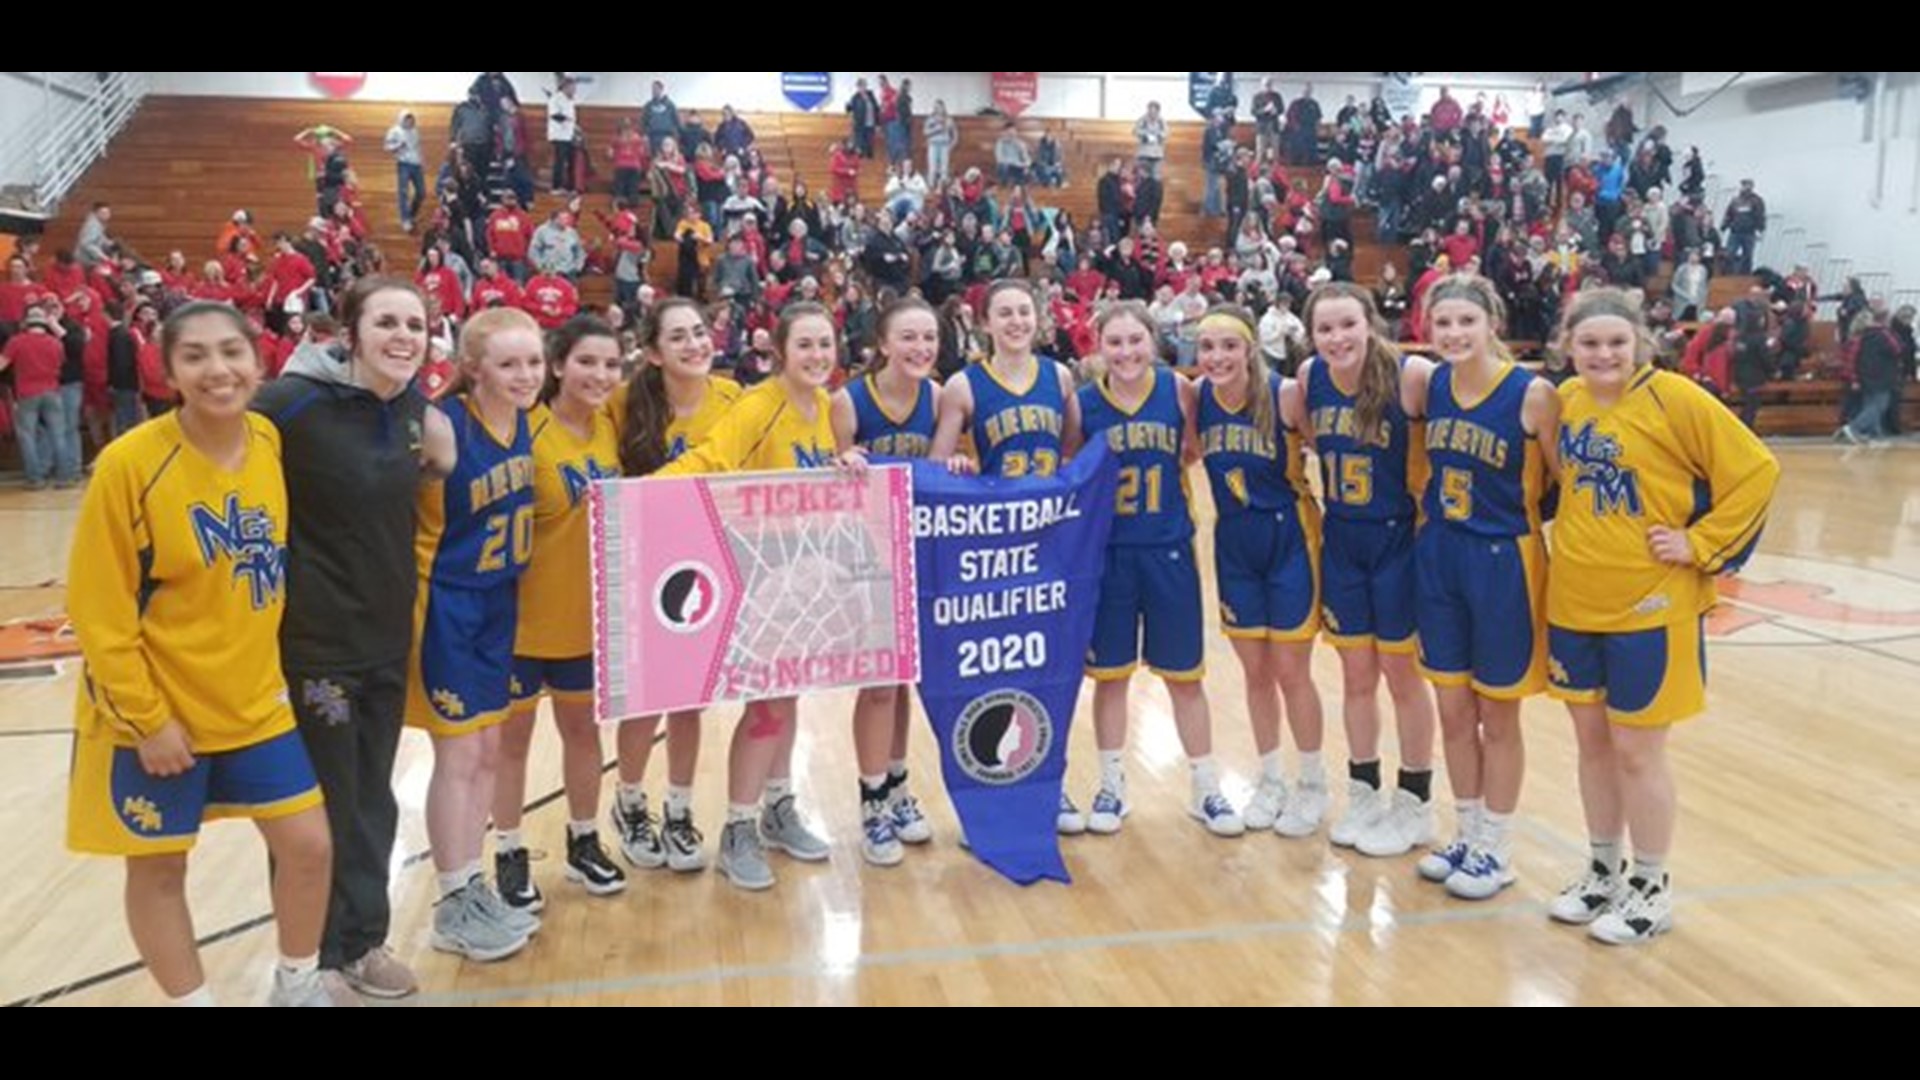 Martensdale-St. Marys edges North Mahaska 41-39 to punch their ticket to Girls State Basketball. It will be their first appearance since 2011.